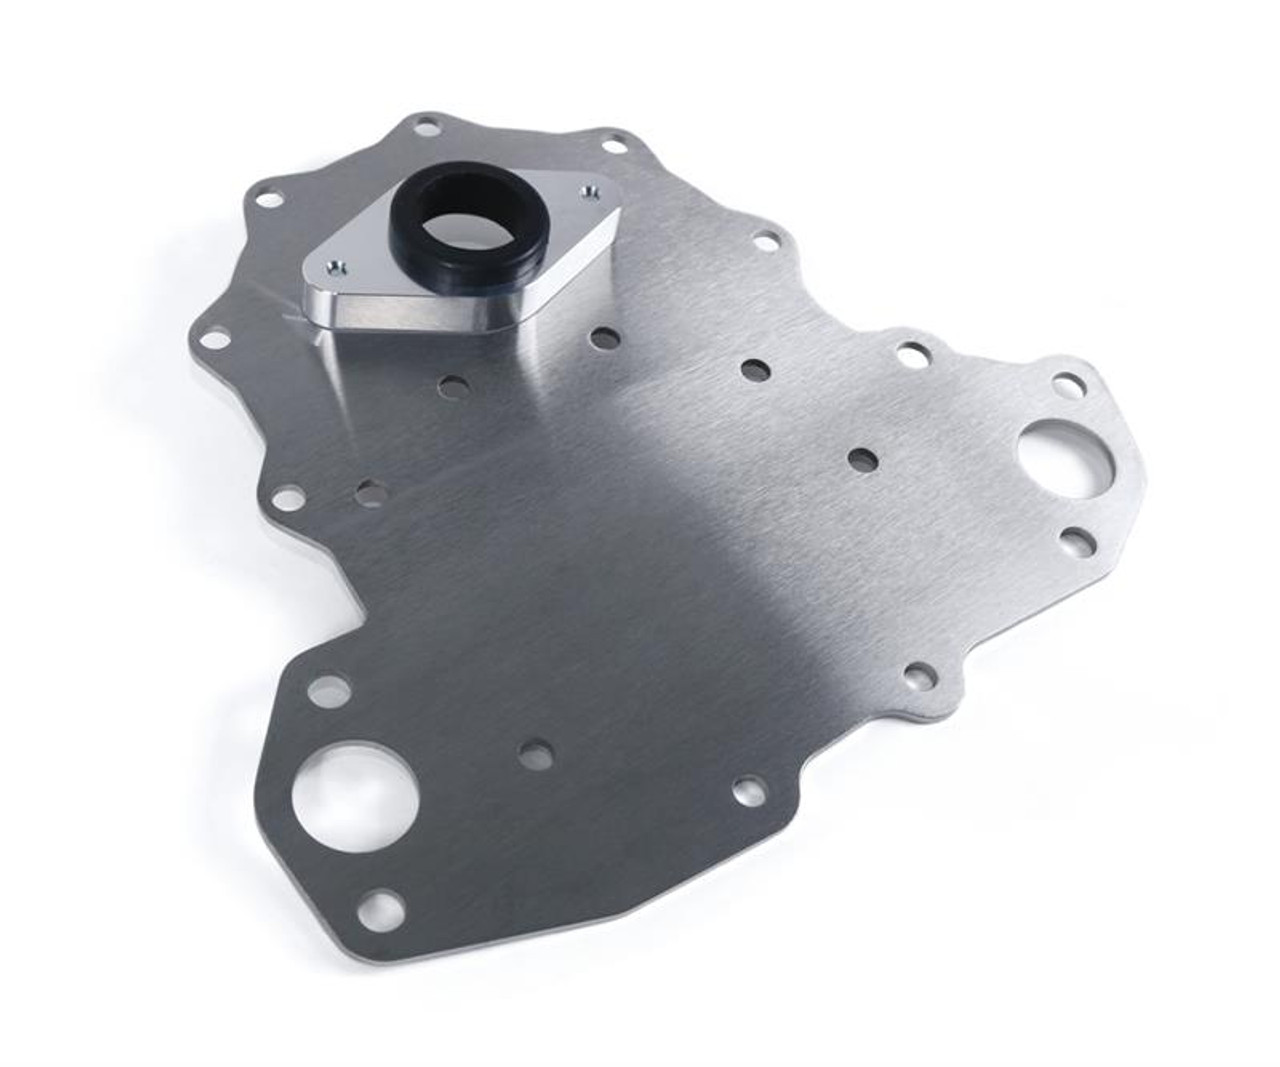  DIESELSITE WATER PUMP BACKING PLATE for 1982 to 2002 CHEVY/GMC 6.2 & 6.5L (WPPLATE65 )